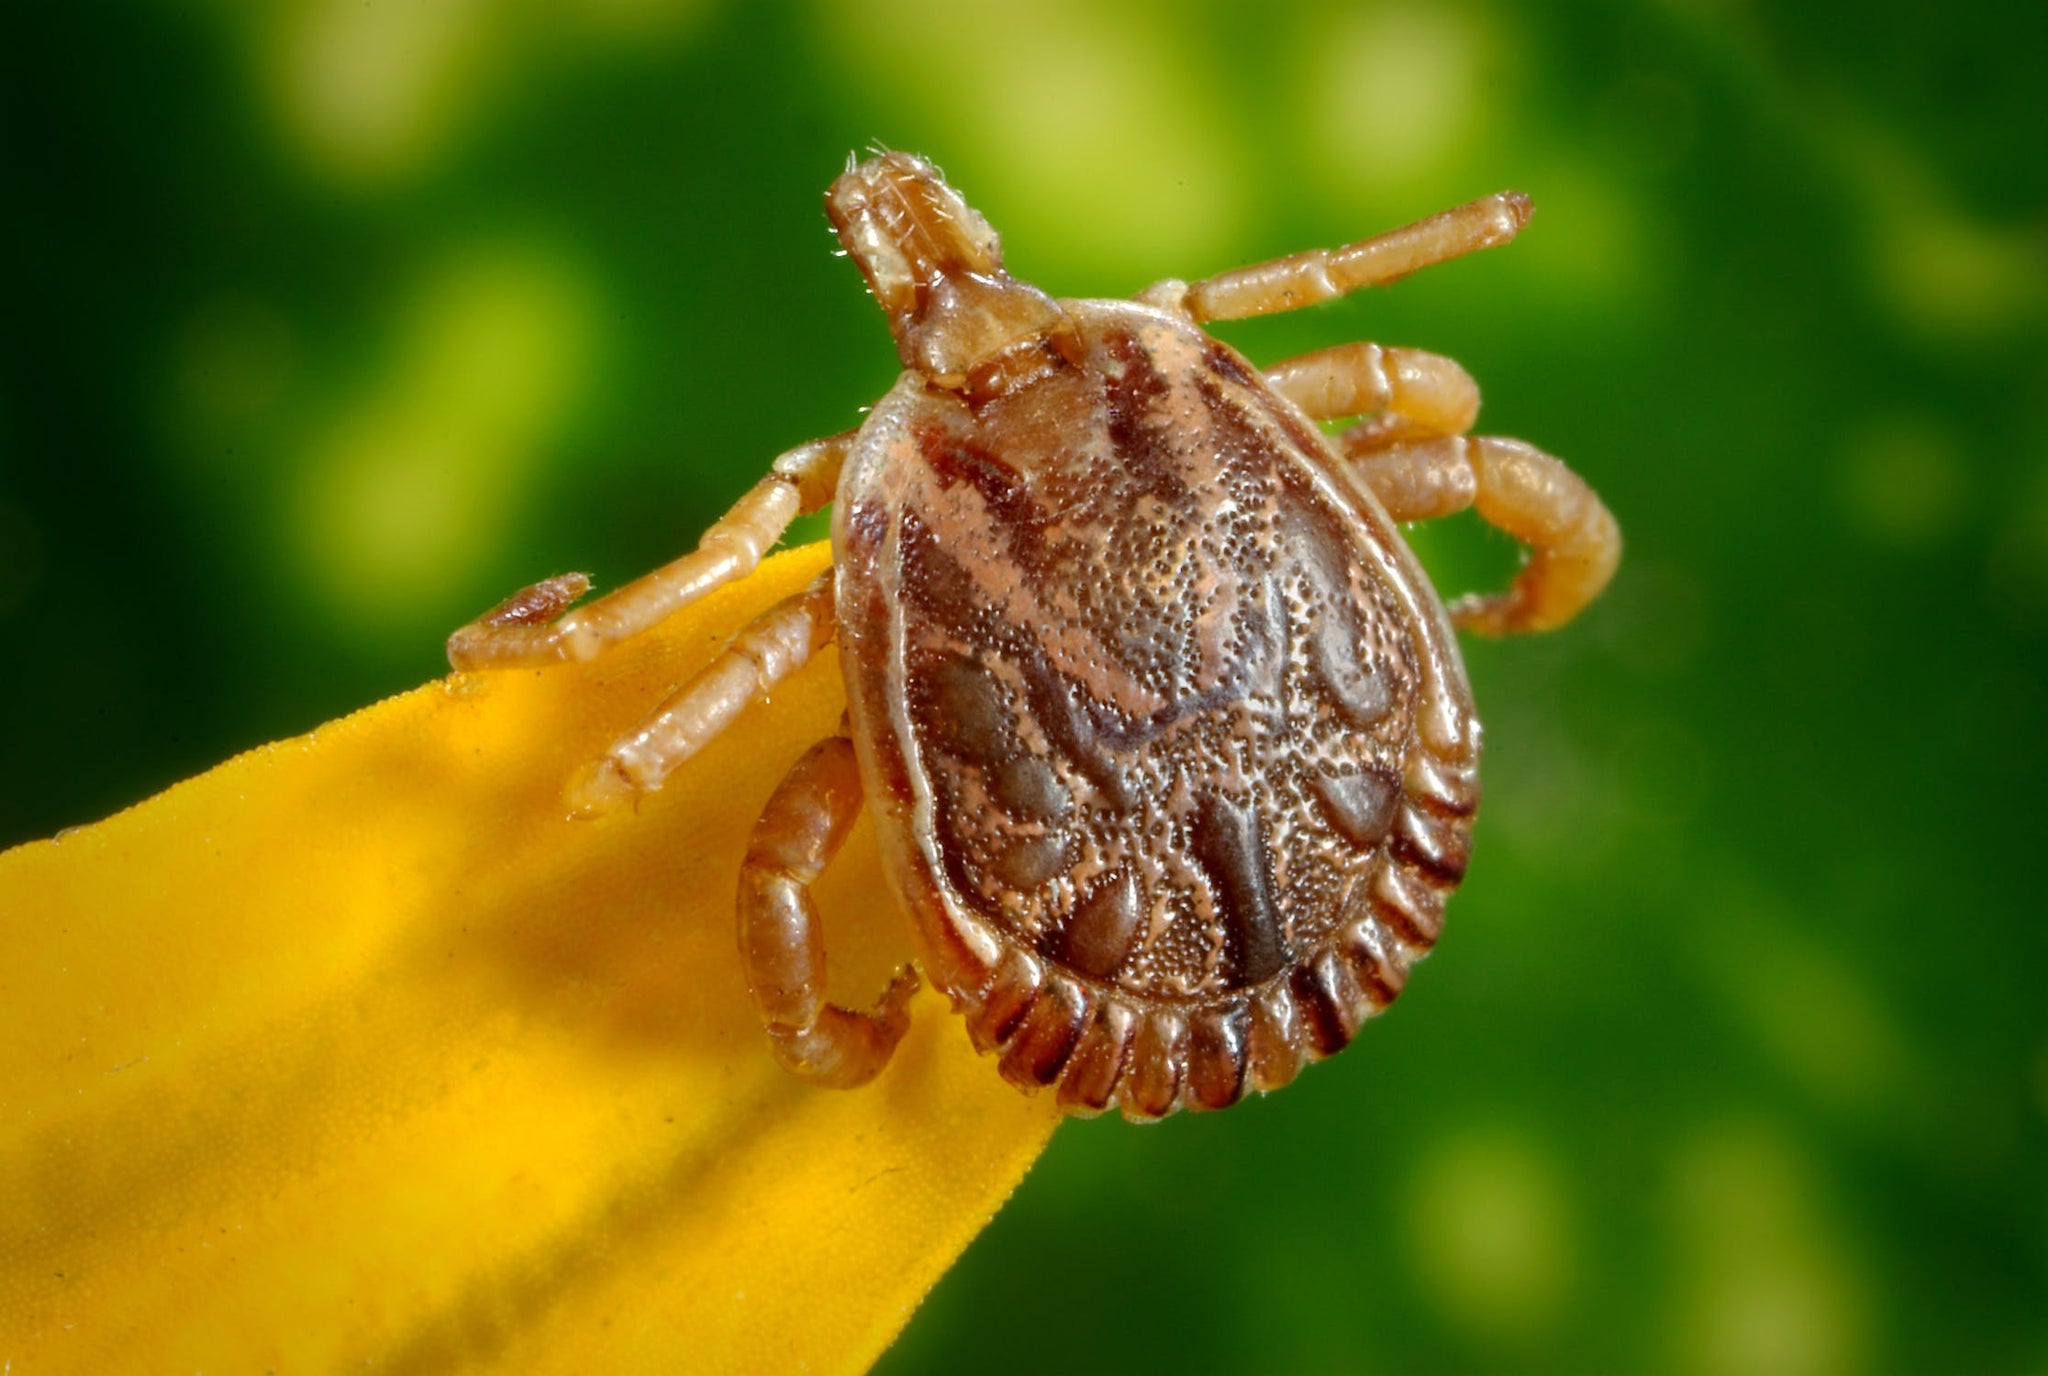 Where are the common ticks found in the US?